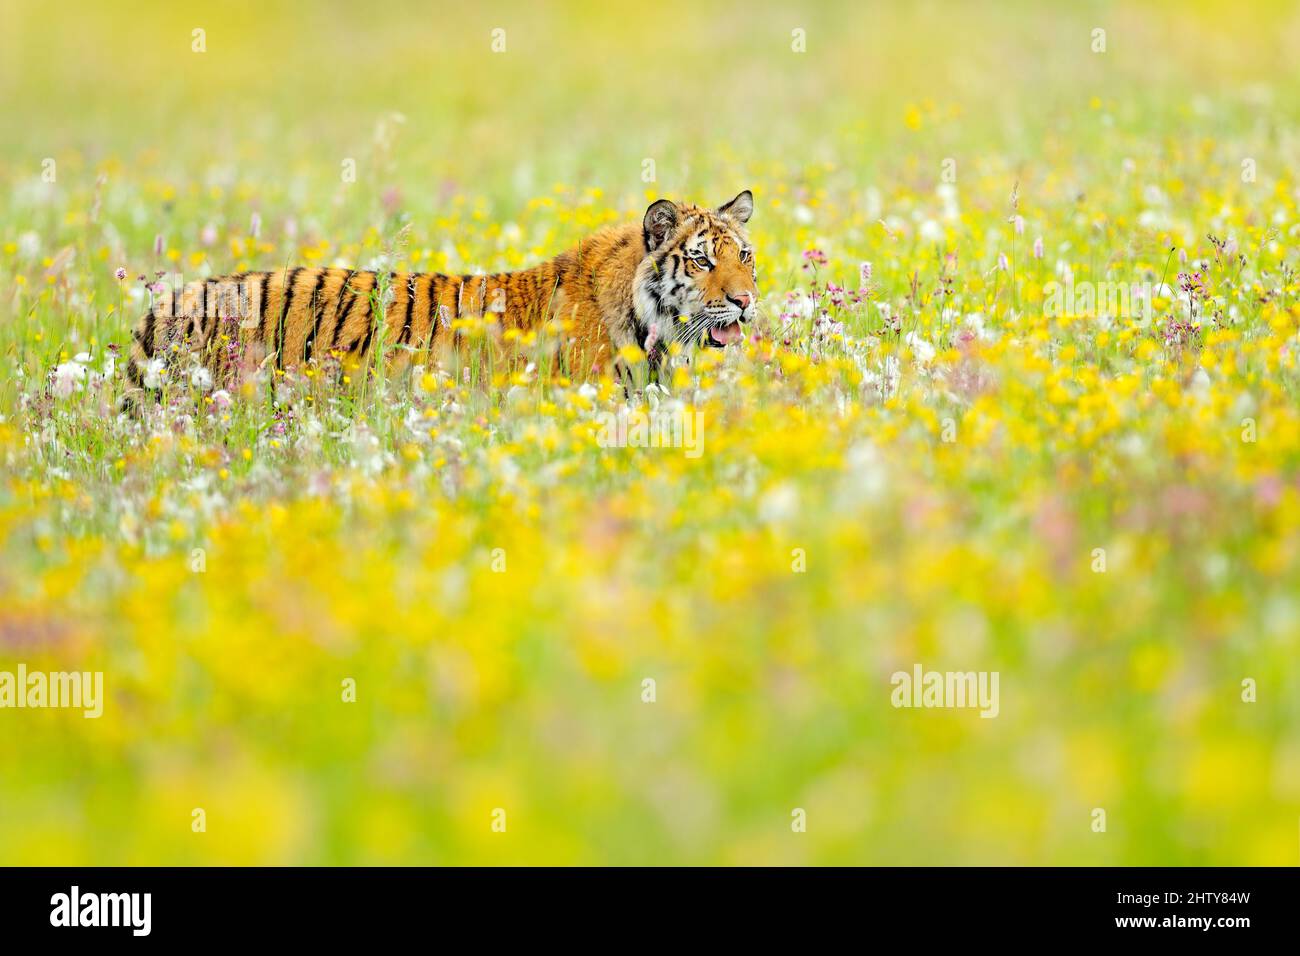 Flower meadow with tiger. Amur tiger walk in the cotton grass